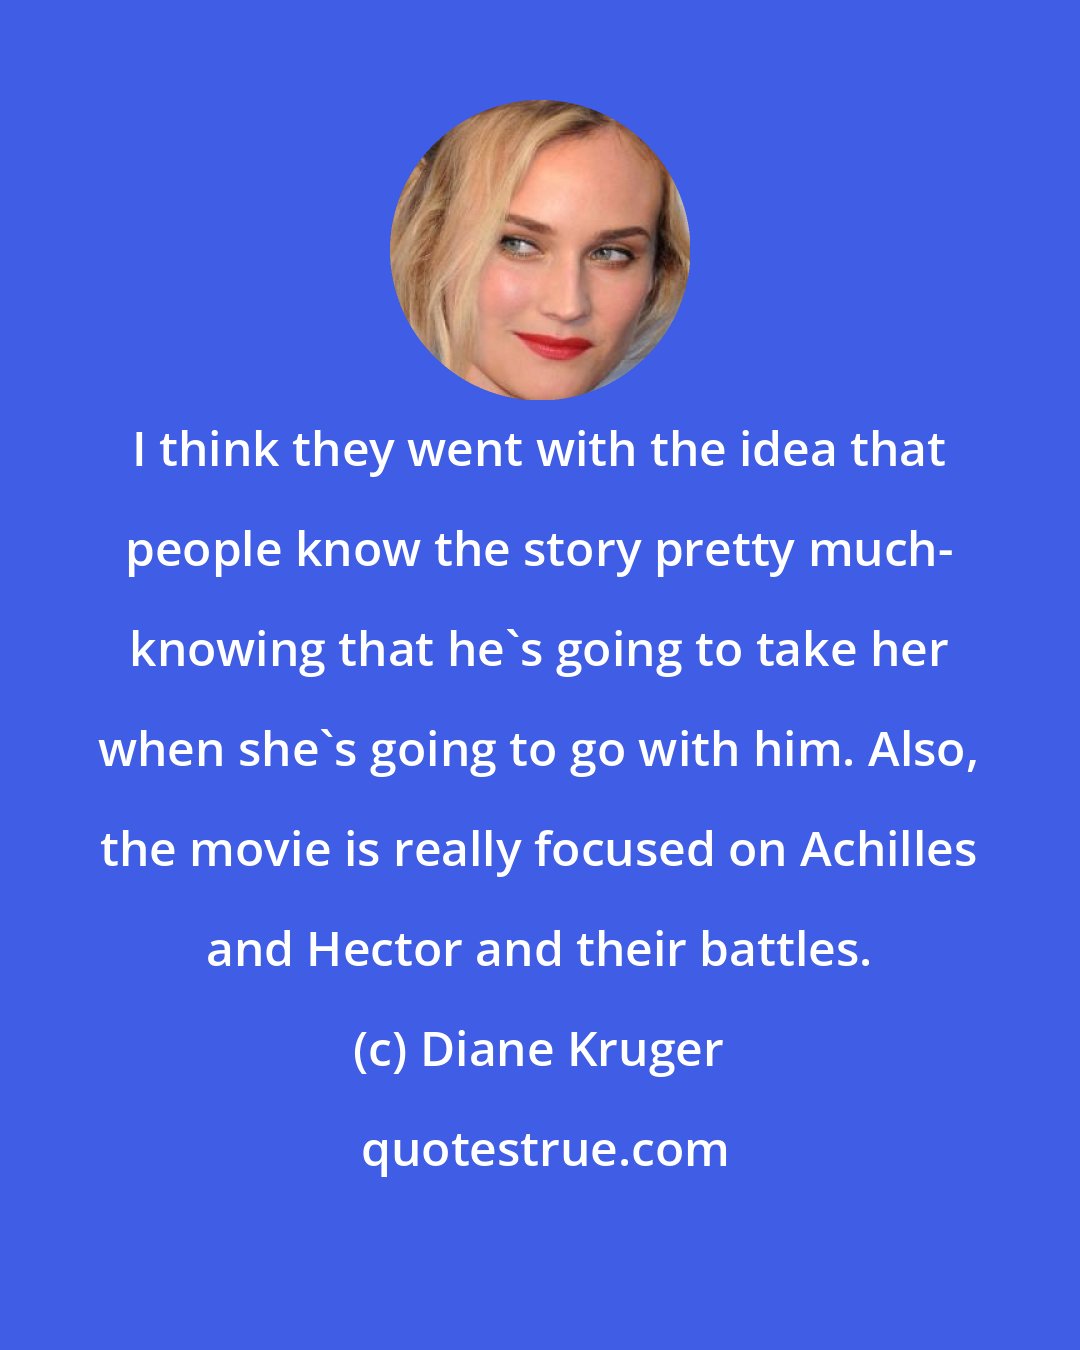 Diane Kruger: I think they went with the idea that people know the story pretty much- knowing that he's going to take her when she's going to go with him. Also, the movie is really focused on Achilles and Hector and their battles.